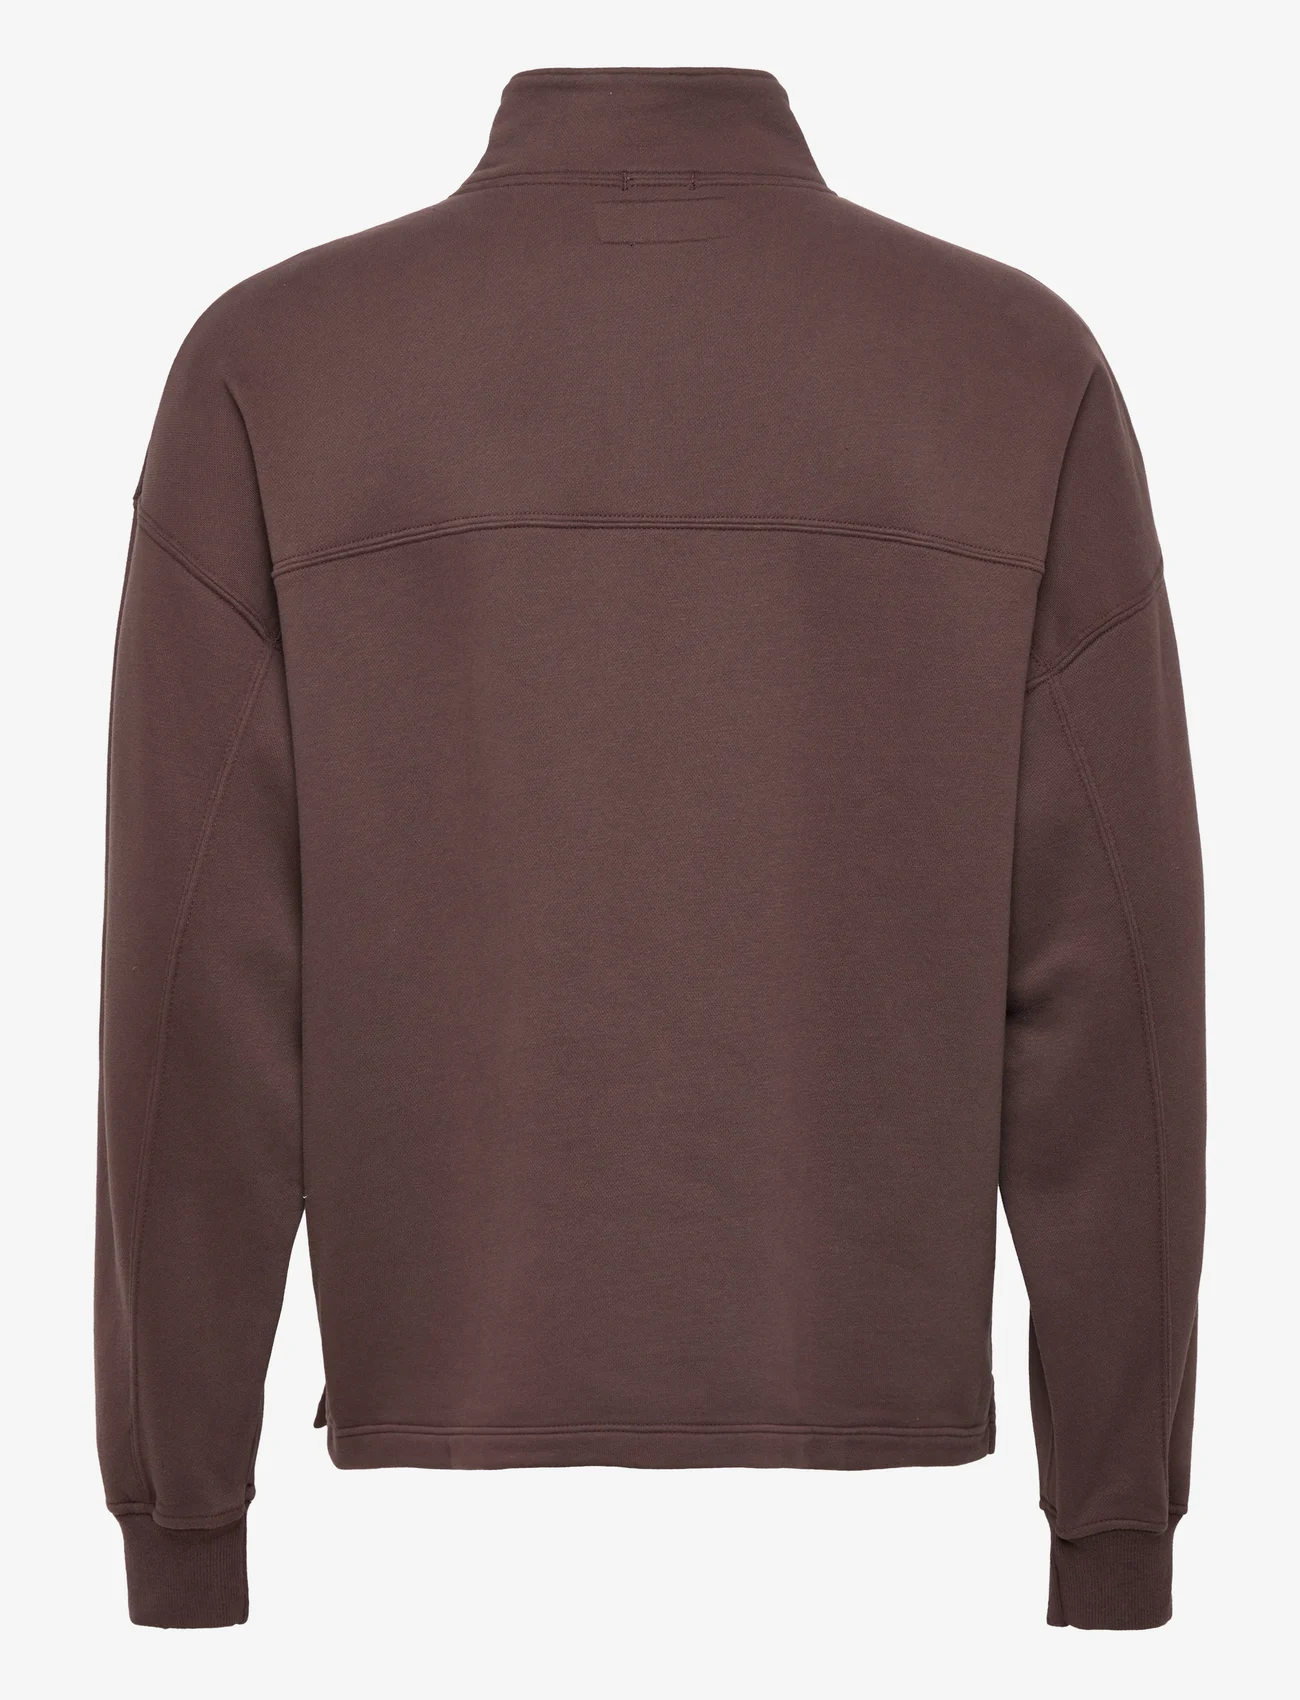 Abercrombie & Fitch - ANF MENS SWEATSHIRTS - truien - brown - 1